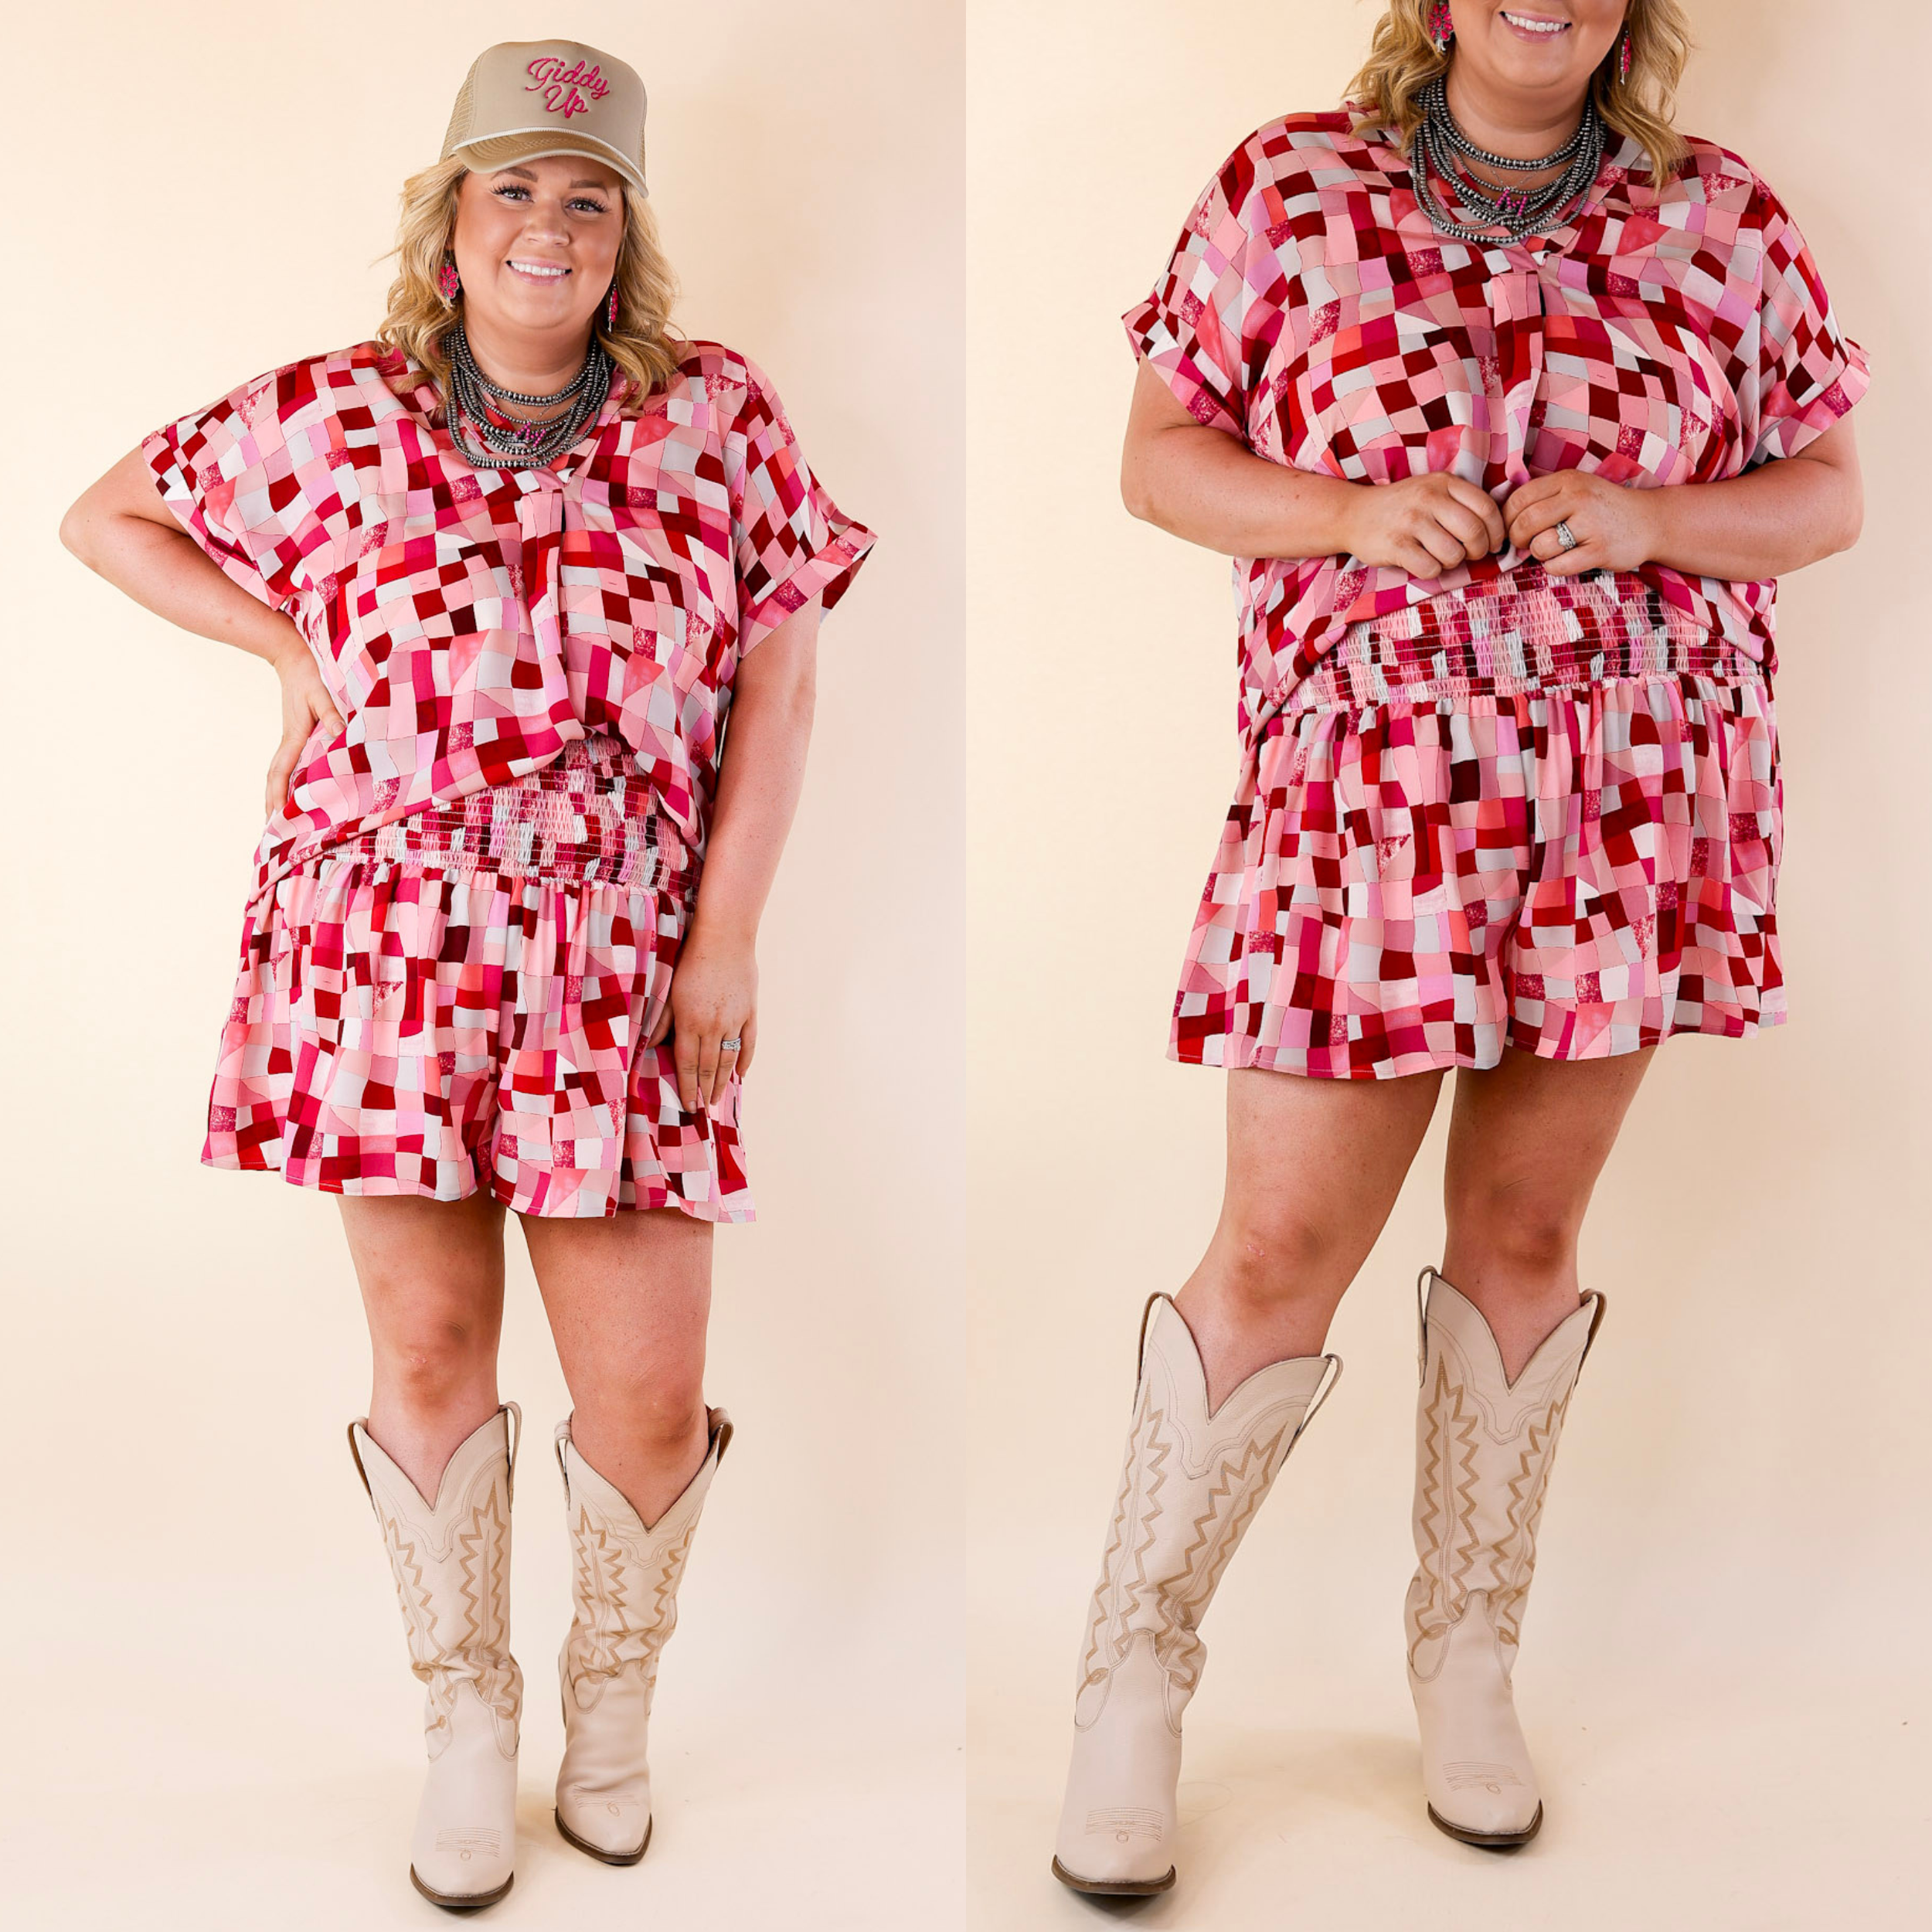 Center Of Attention Disco Ruffle Shorts in Berry Pink - Giddy Up Glamour Boutique